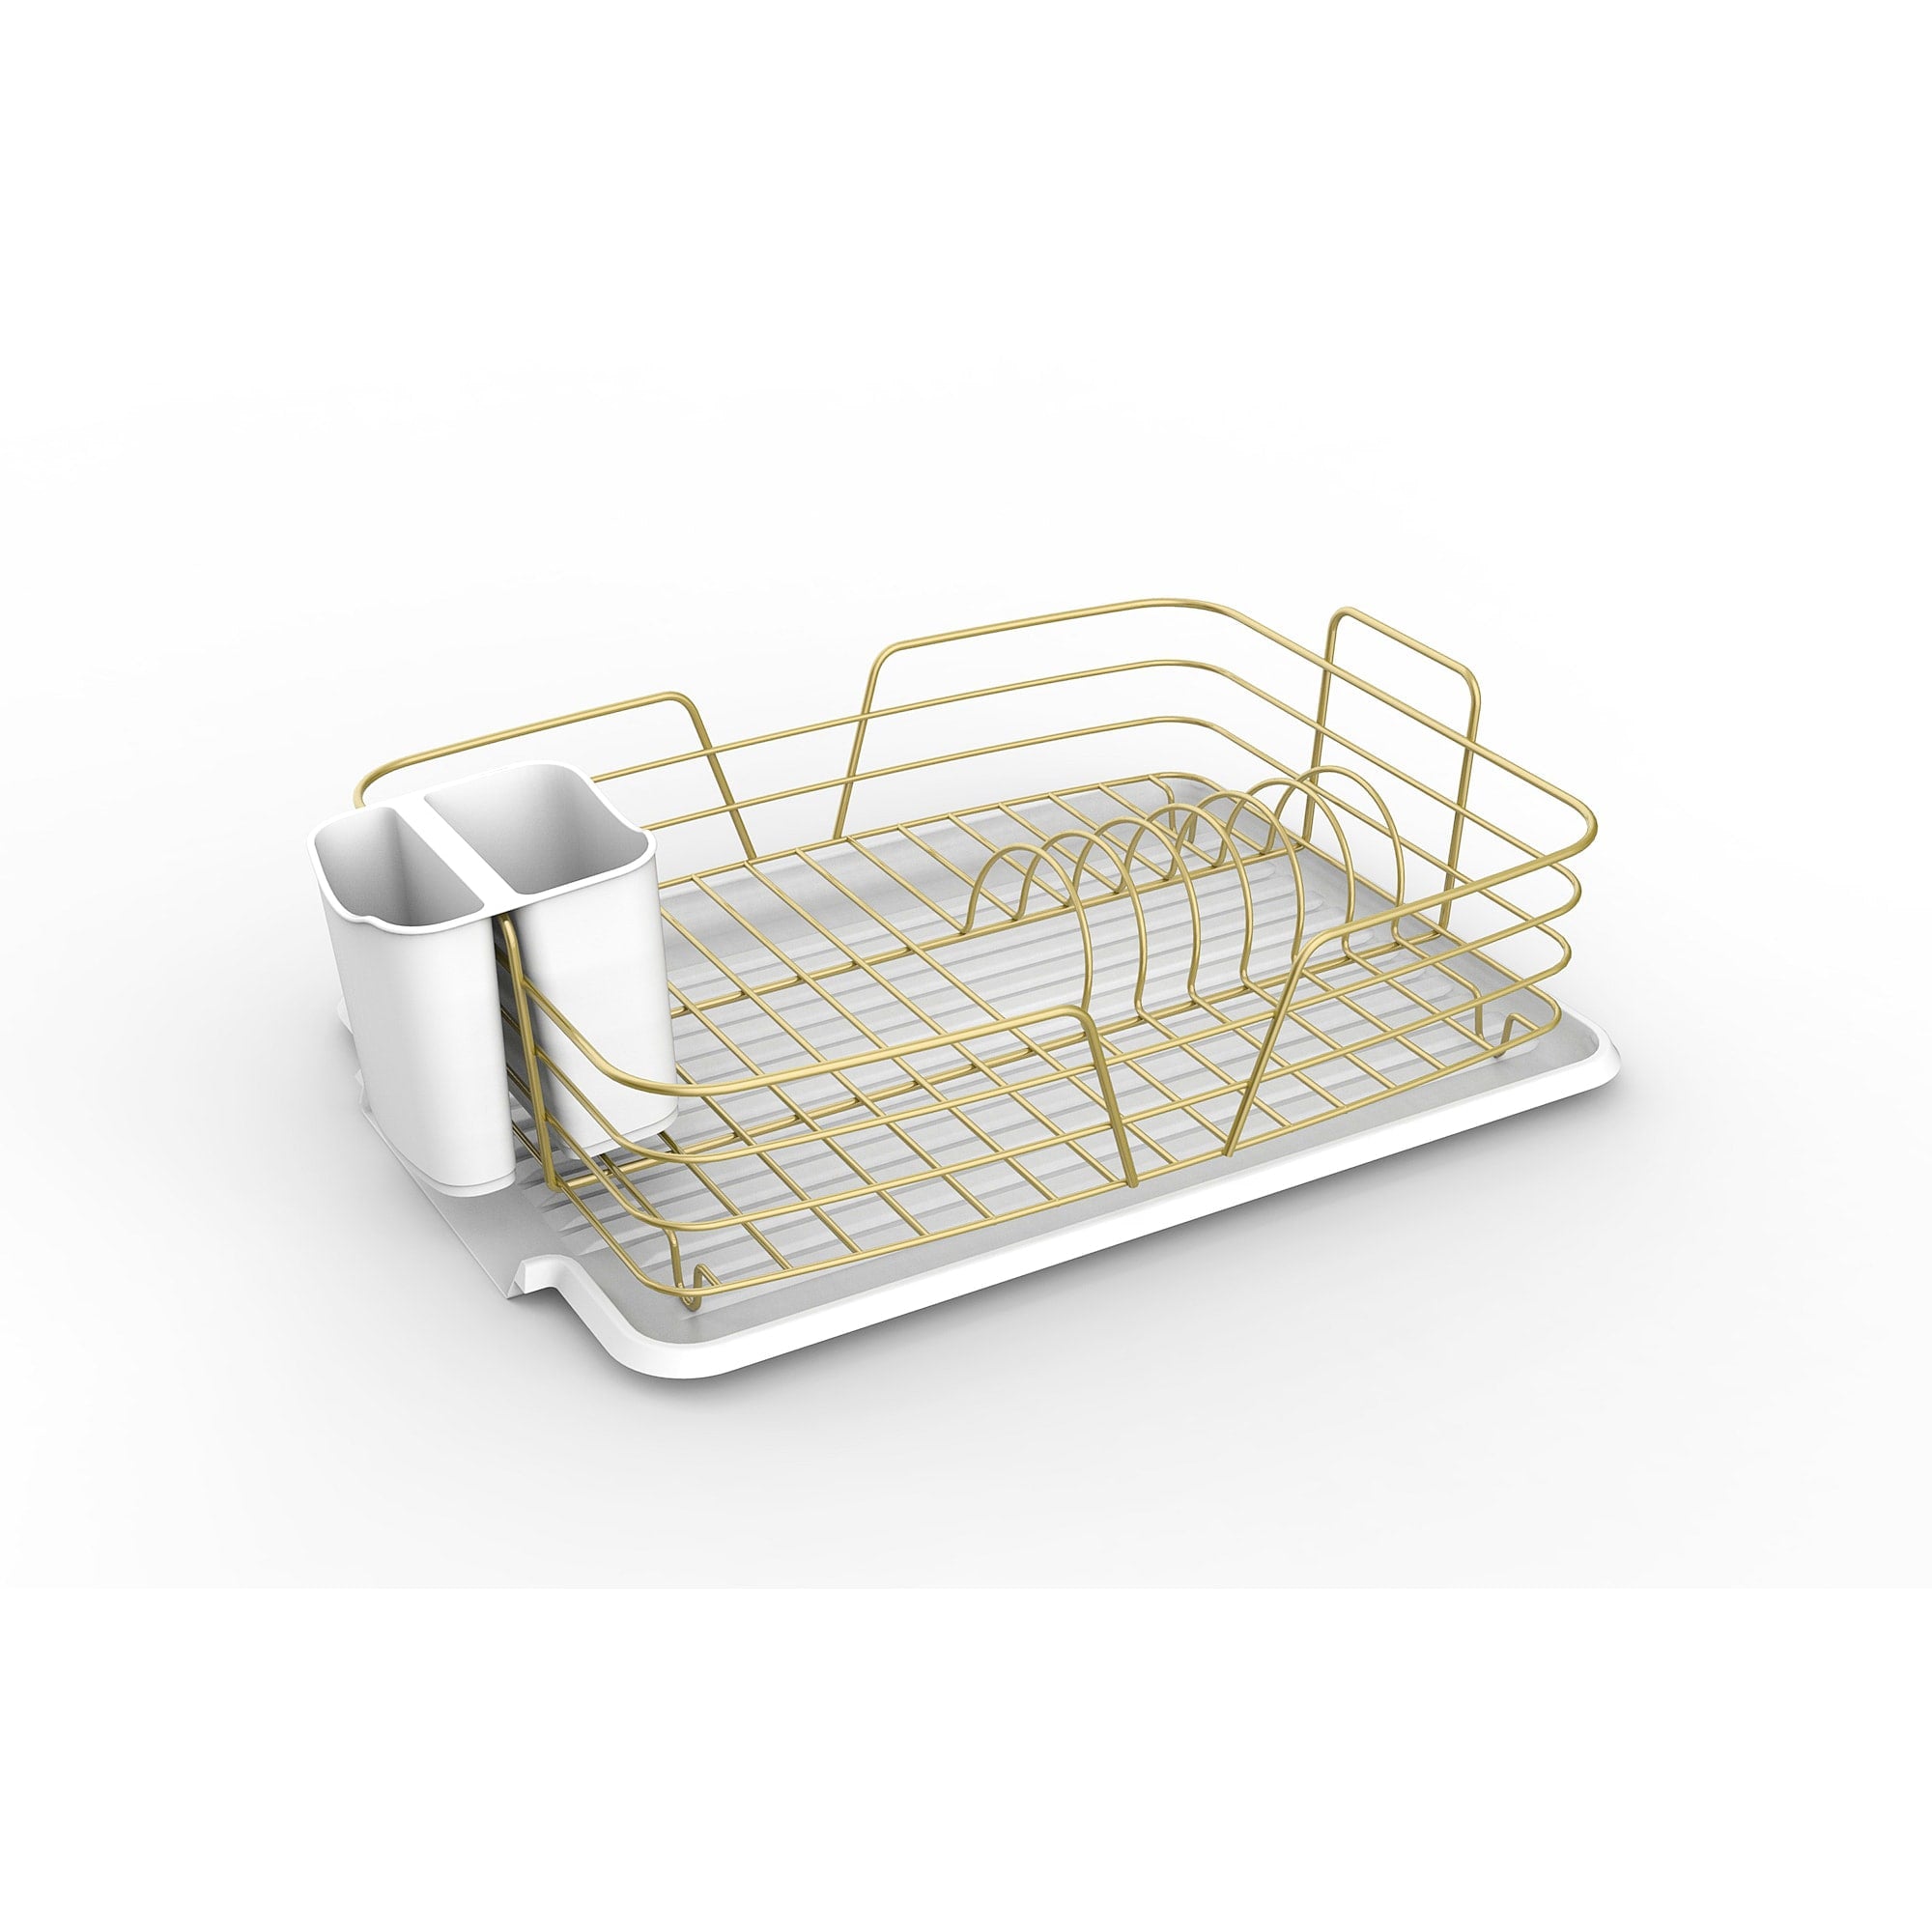 4 pieces Michael Graves Design Deluxe Extra Large Capacity Stainless Steel Dish  Rack With Wine Glass Holder, Black - Dish Drying Racks - at 